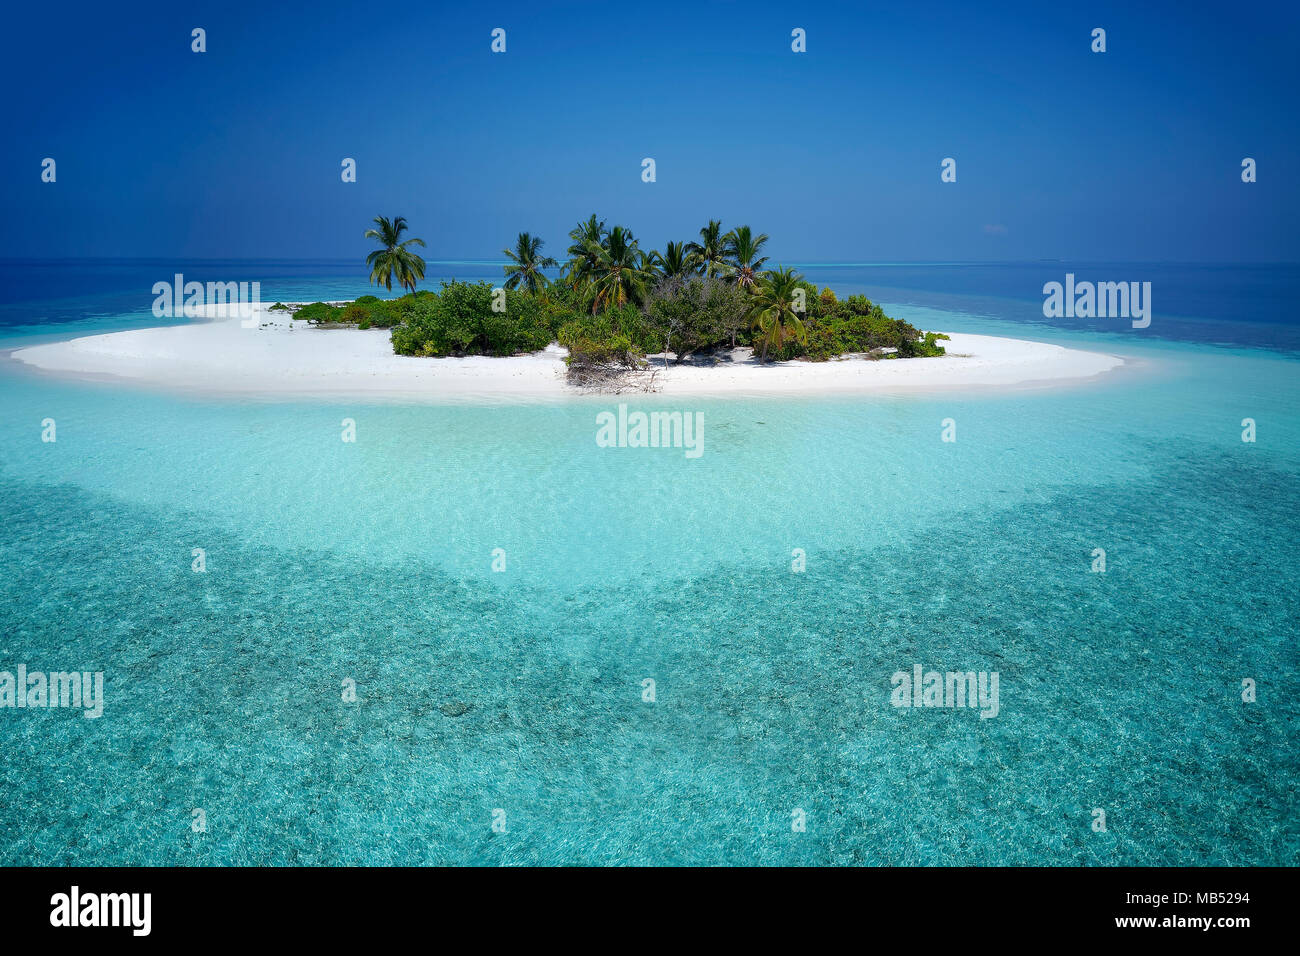 Uninhabited palm island with sandy beach, offshore coral reef, Ari atoll, Indian Ocean, Maldives Stock Photo